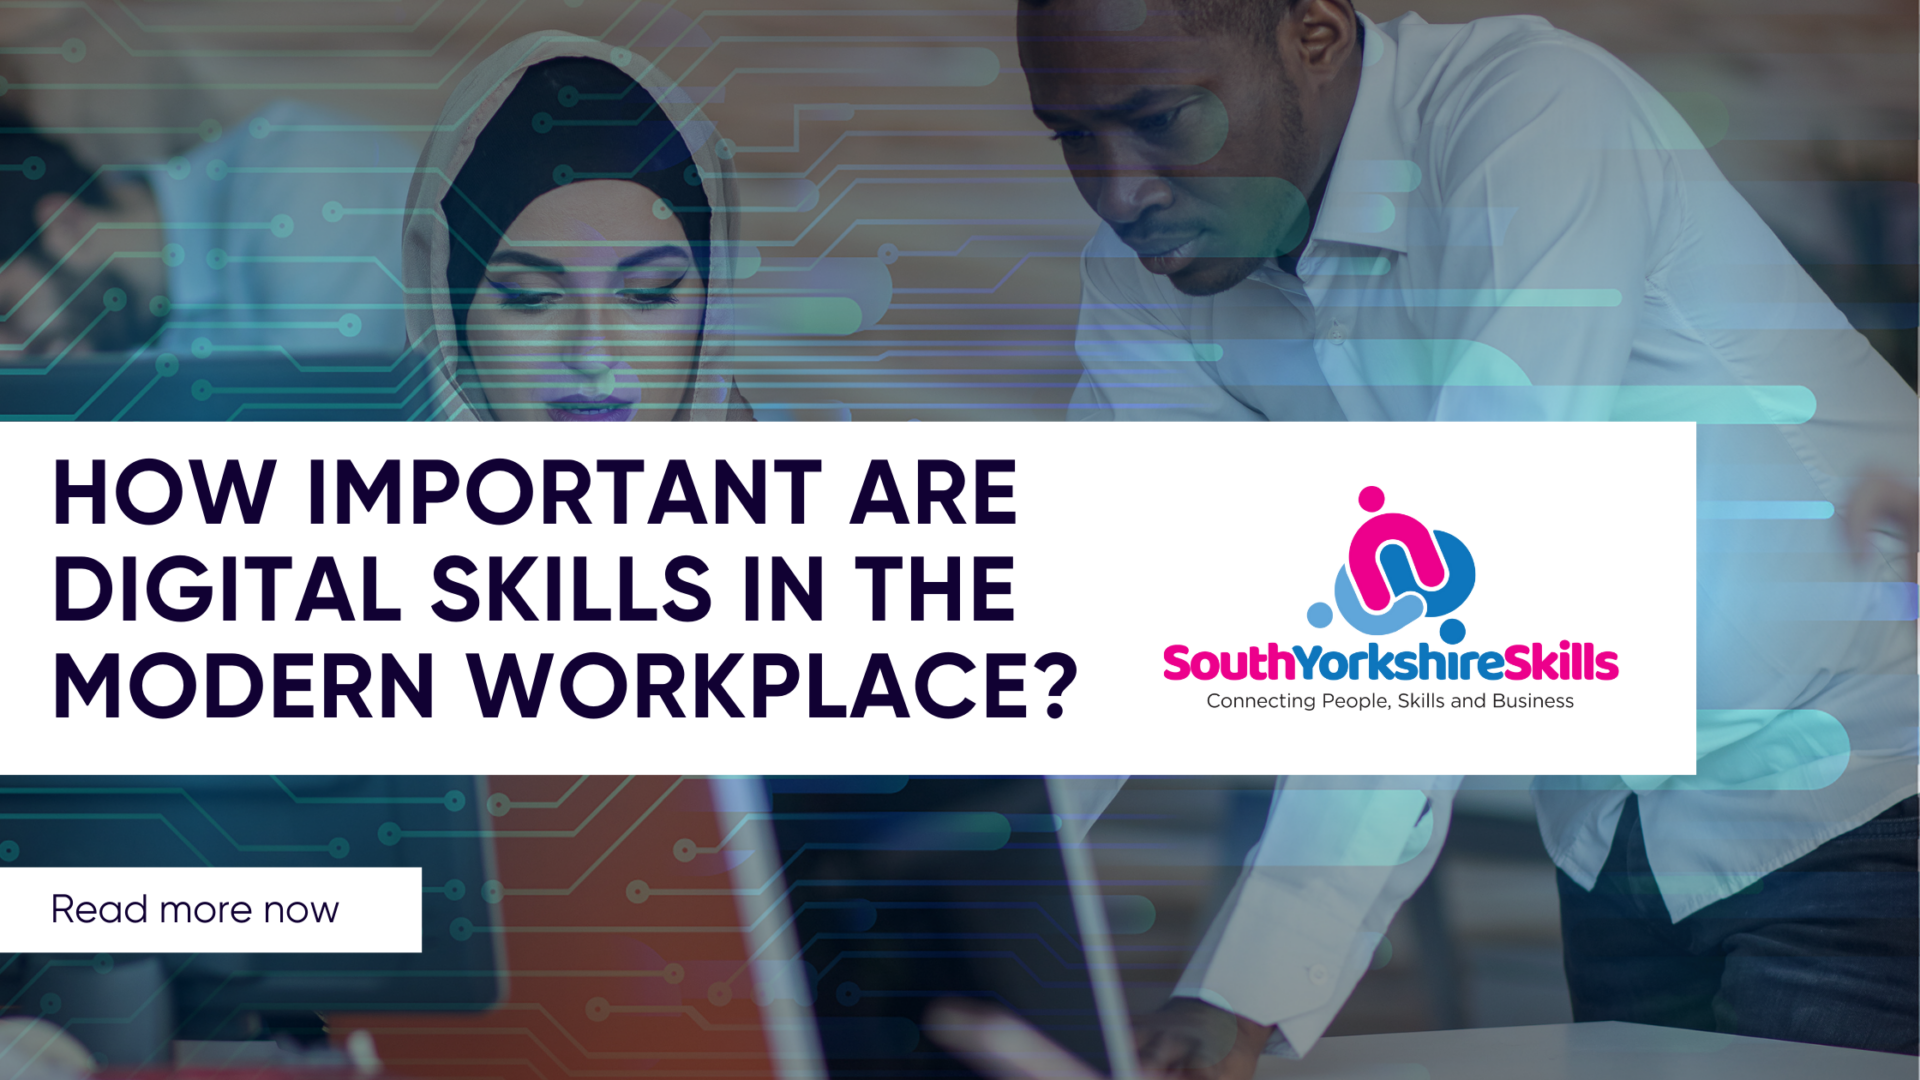 How Important Are Digital Skills in the Modern Workplace?